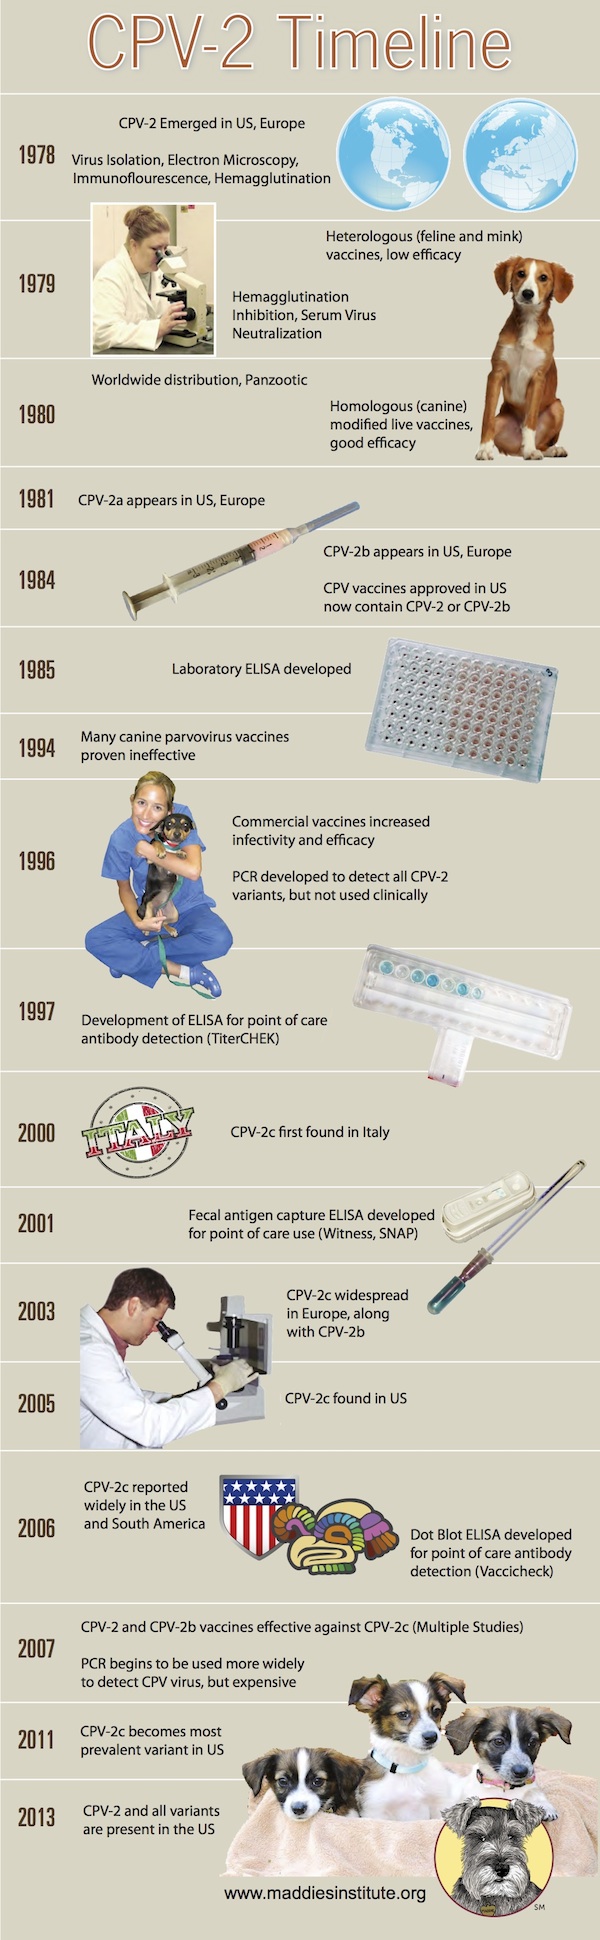 Graphic showiing a timeline over years, of CPV-2 research and treatments